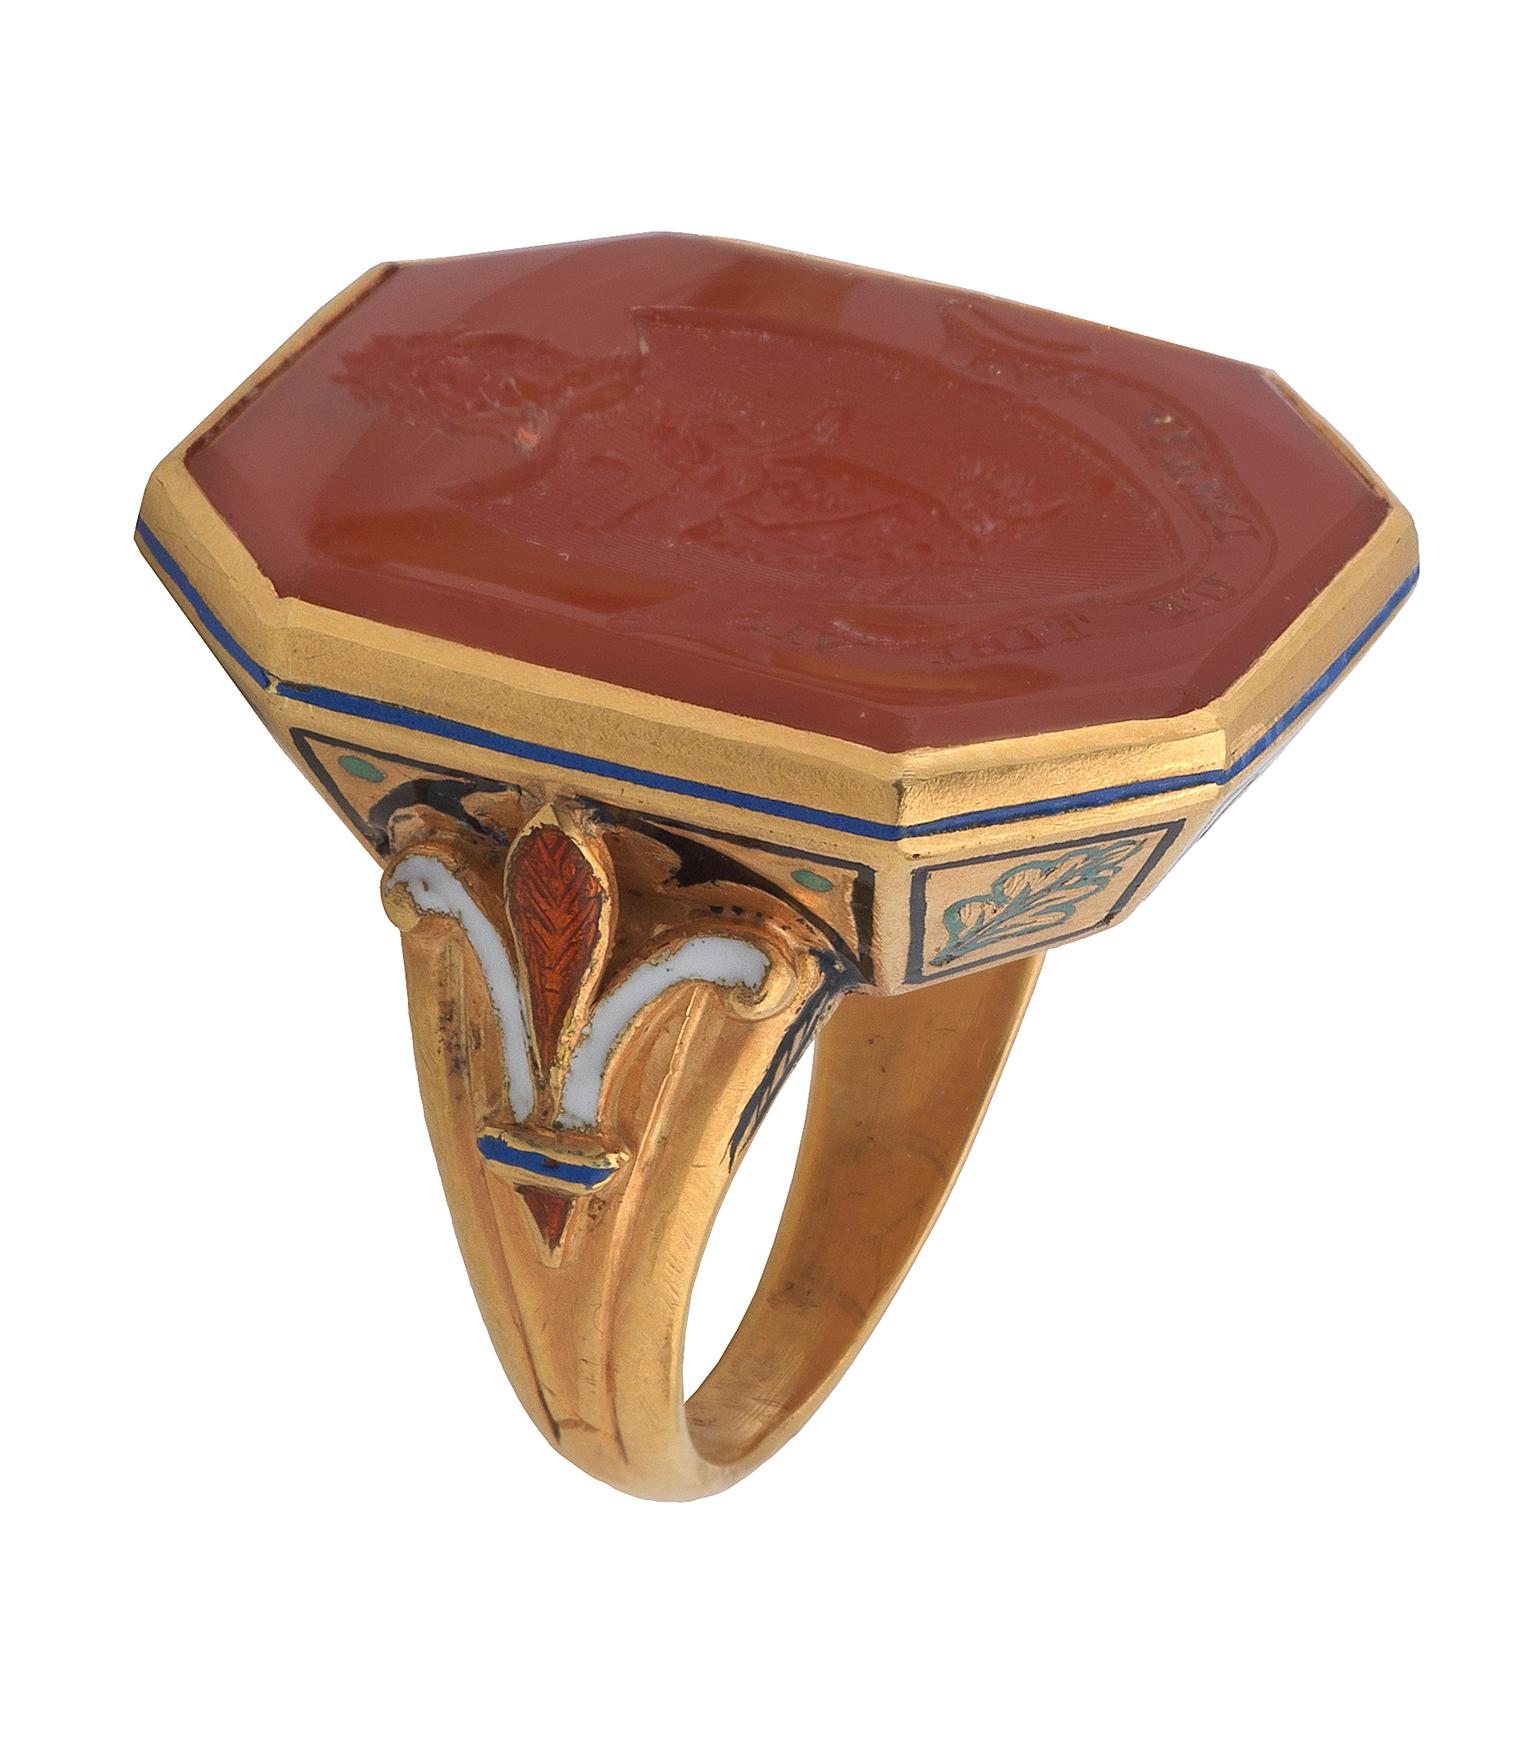 Bernardo Antichità Ponte Vecchio Florence 

With an square carnelian engraved with a family coat-of-arms depicting a lion crest and motto 'Fac Alteri Ut Tibi Vis', the gem set in a gold and enamel revival renaissance style 
Mounted in gold.
The